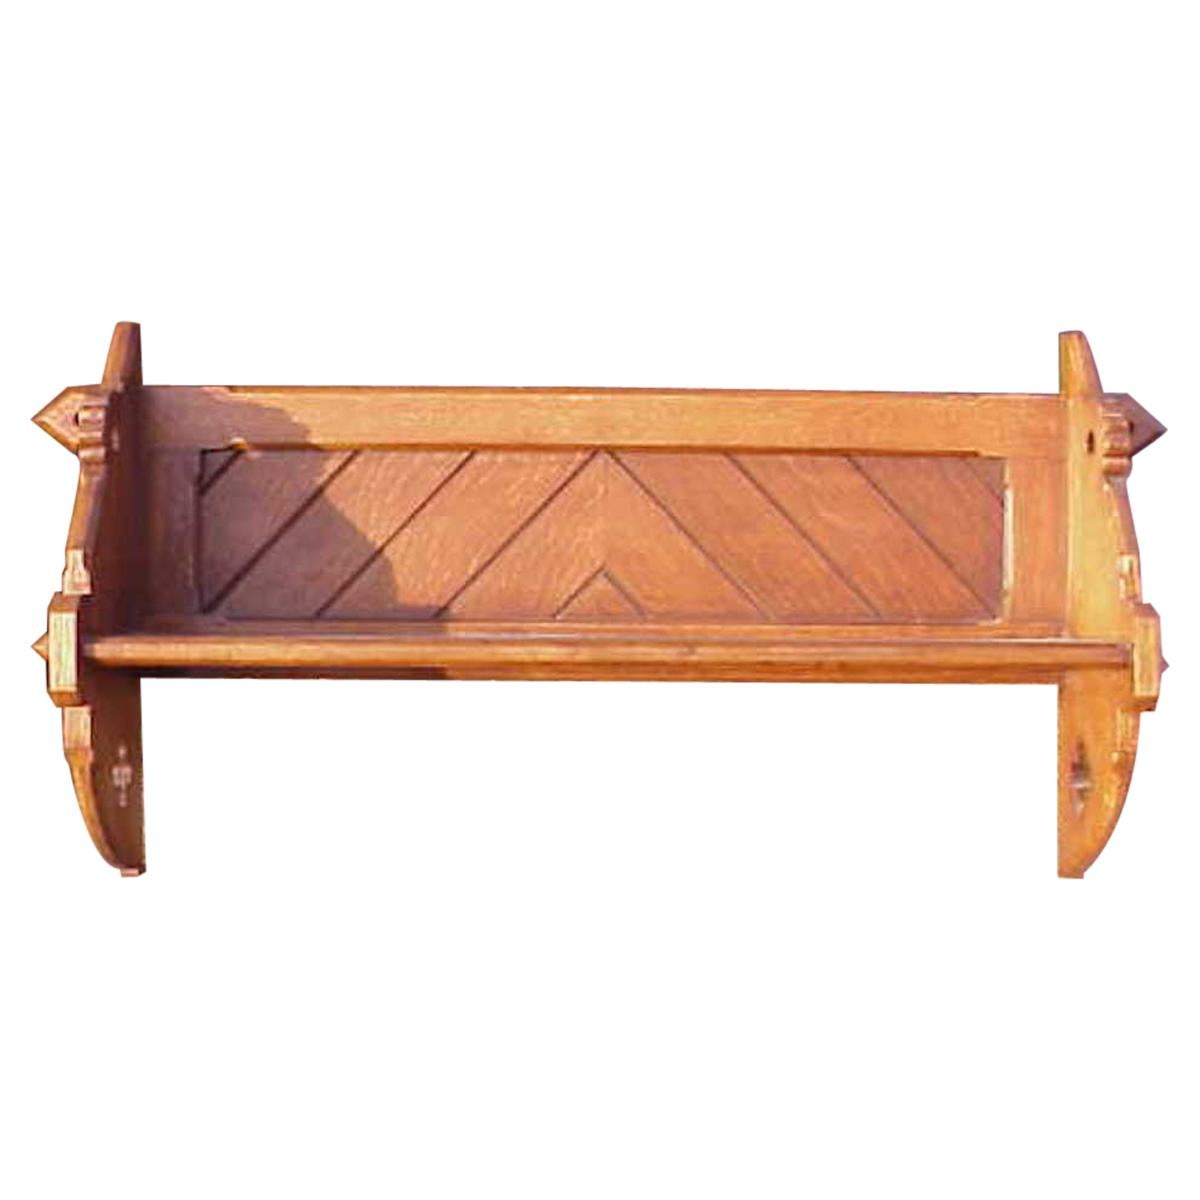 Charles Bevan Style a Gothic Revival Hanging Oak Shelf with through Tenon Joints